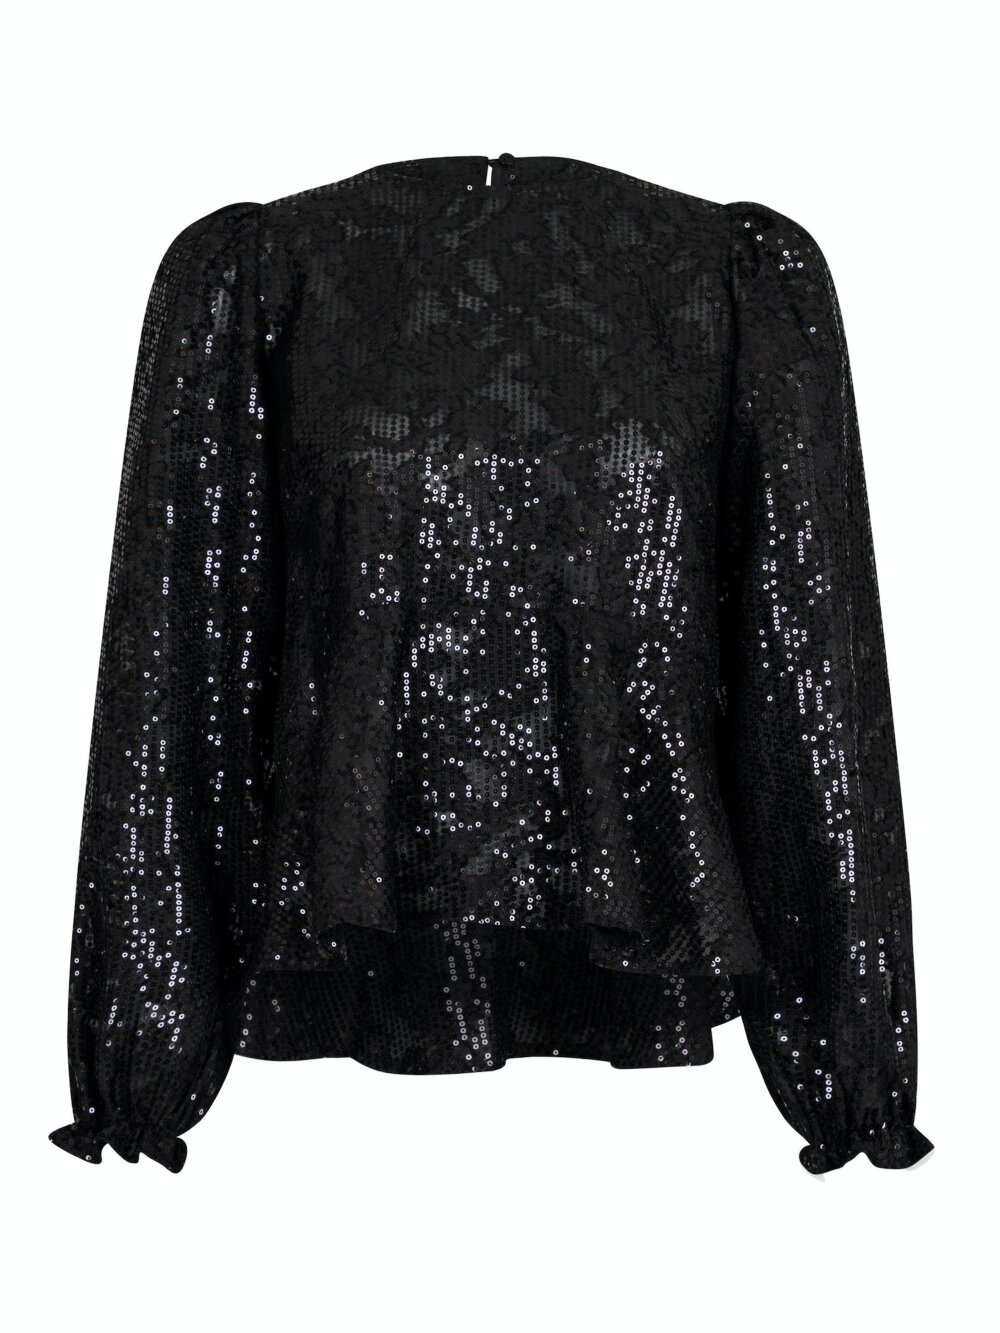 Neo Noir - Rizzo Sequins Bluse